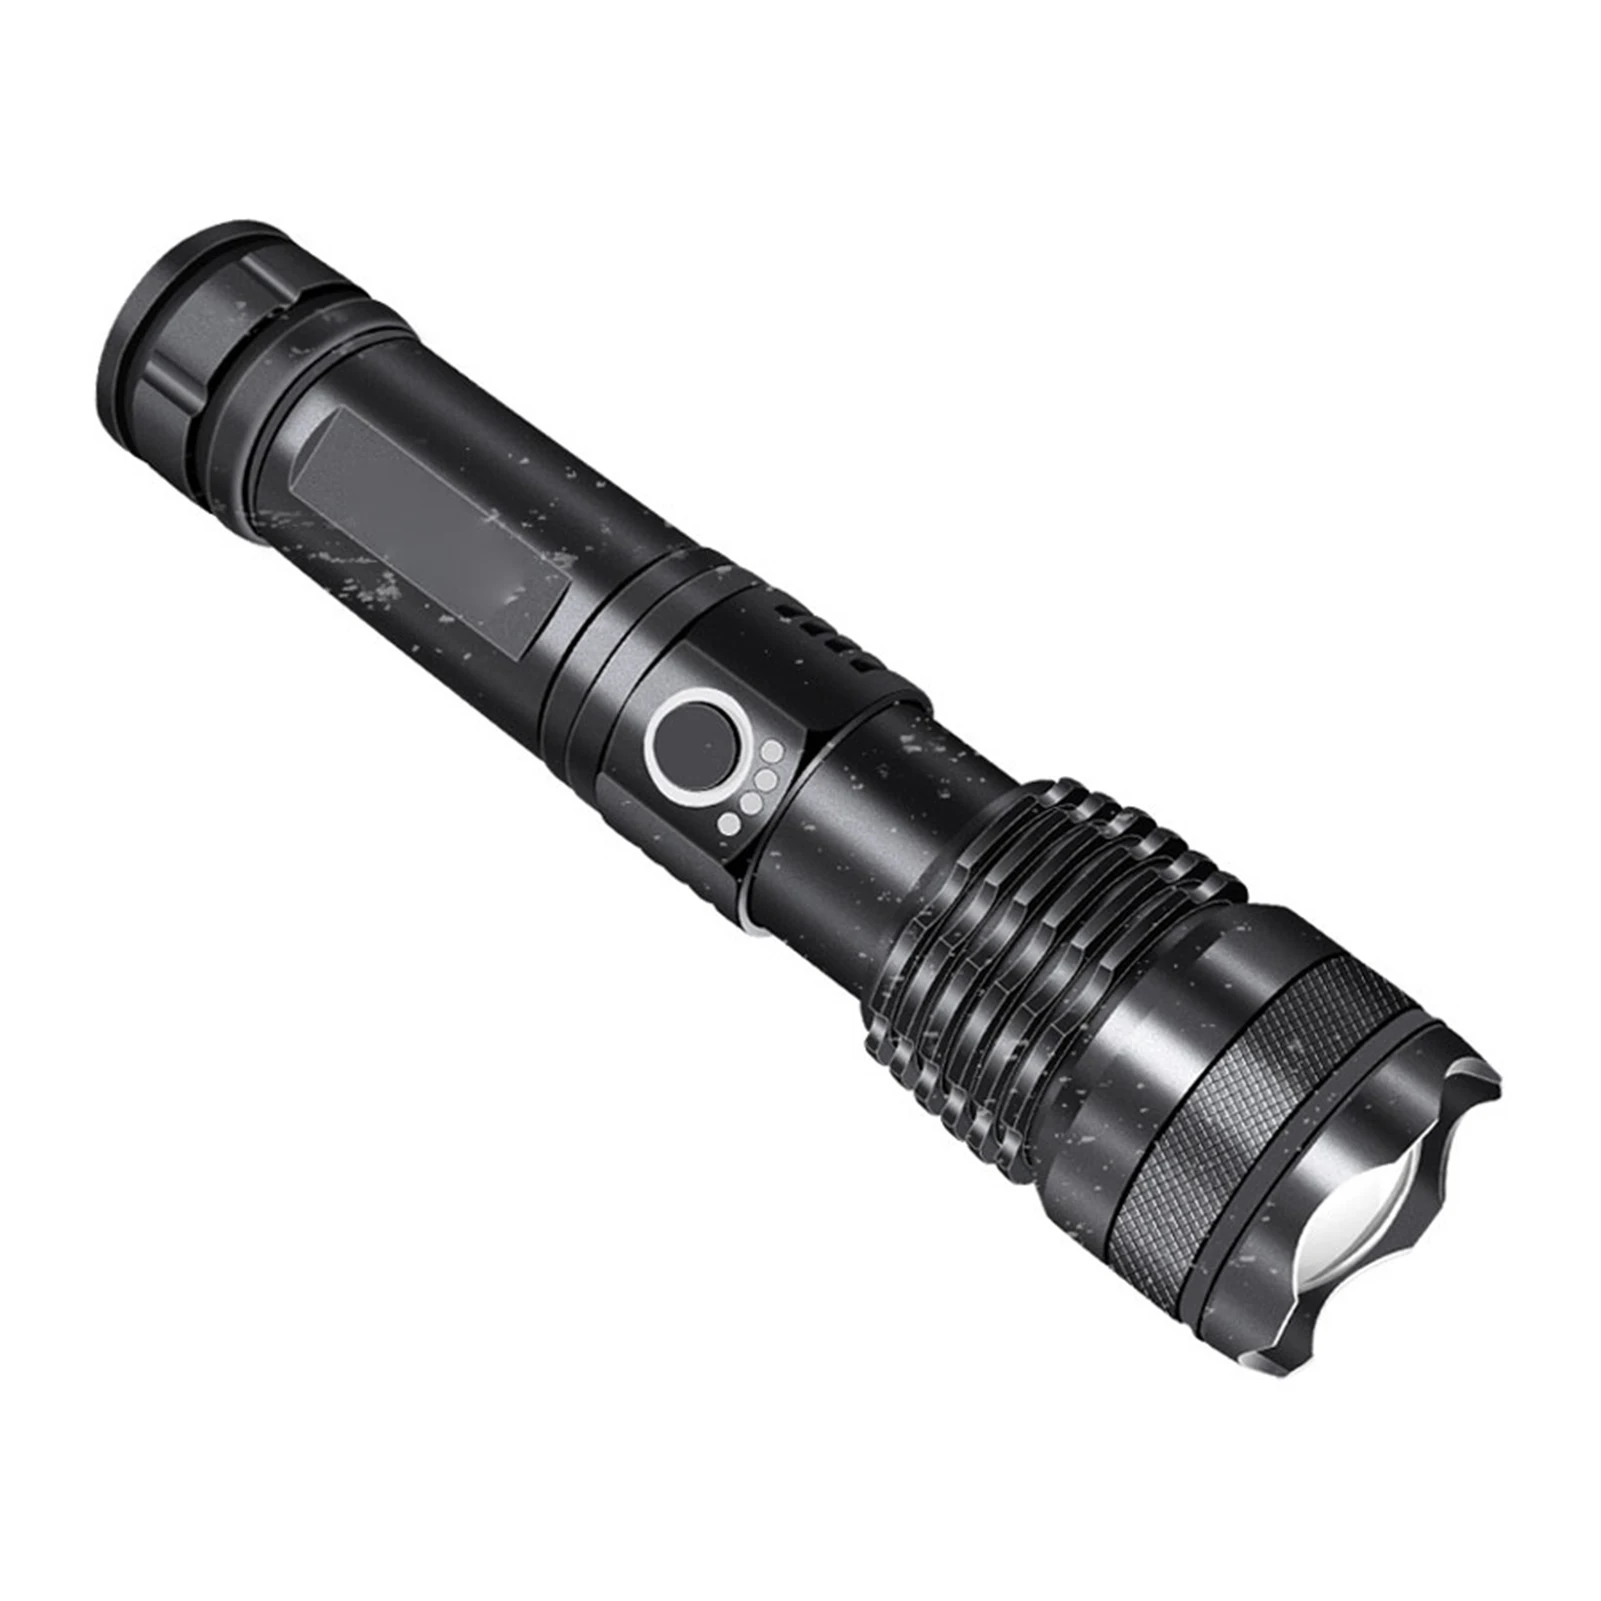 

Portable LED Hunt Flashlight Zoomable Light with Intelligent Power Indicator for Night Hike Fishing Outdoor Activities THJ99